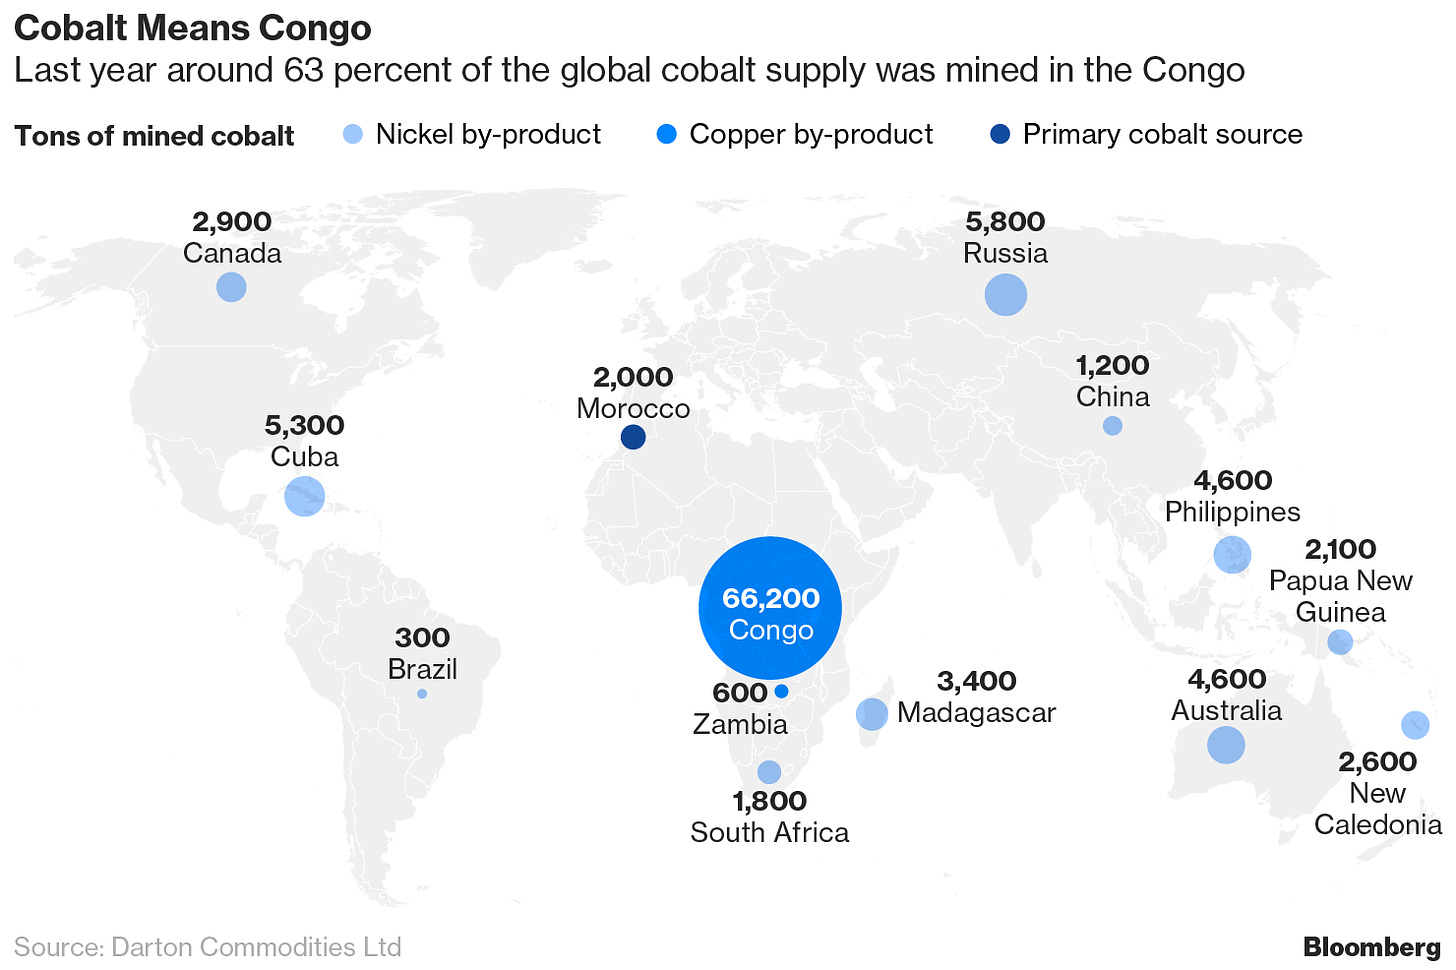 We'll All Be Relying on Congo to Power Our Electric Cars | BloombergNEF